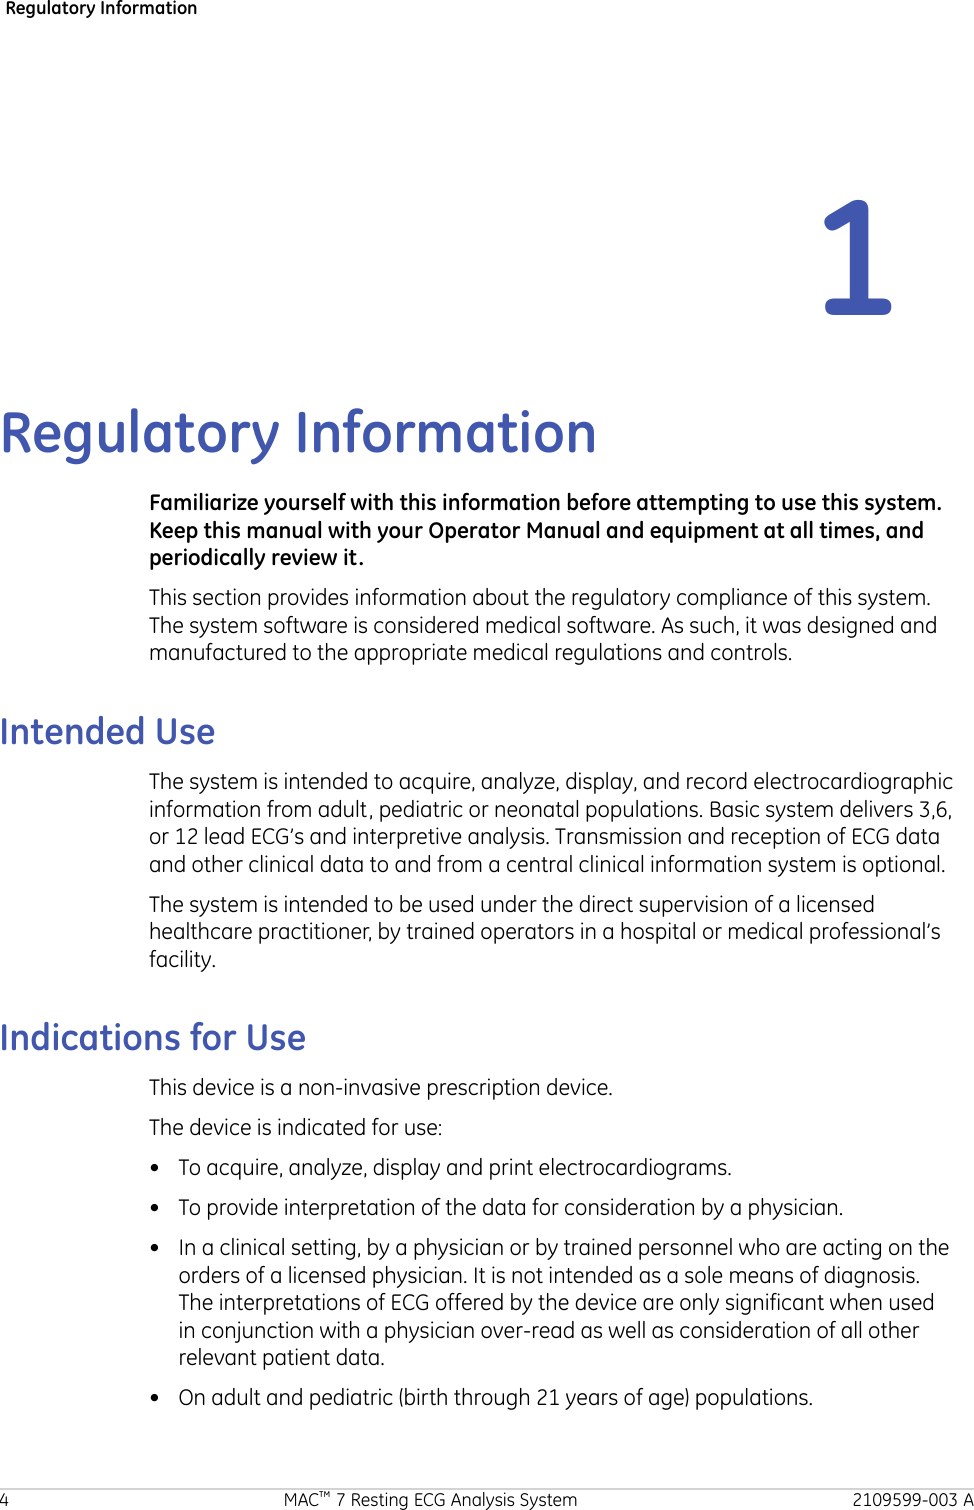 Regulatory Information1Regulatory InformationFamiliarize yourself with this information before attempting to use this system.Keep this manual with your Operator Manual and equipment at all times, andperiodically review it.This section provides information about the regulatory compliance of this system.The system software is considered medical software. As such, it was designed andmanufactured to the appropriate medical regulations and controls.Intended UseThe system is intended to acquire, analyze, display, and record electrocardiographicinformation from adult, pediatric or neonatal populations. Basic system delivers 3,6,or 12 lead ECG’s and interpretive analysis. Transmission and reception of ECG dataand other clinical data to and from a central clinical information system is optional.The system is intended to be used under the direct supervision of a licensedhealthcare practitioner, by trained operators in a hospital or medical professional’sfacility.Indications for UseThis device is a non-invasive prescription device.The device is indicated for use:• To acquire, analyze, display and print electrocardiograms.• To provide interpretation of the data for consideration by a physician.• In a clinical setting, by a physician or by trained personnel who are acting on theorders of a licensed physician. It is not intended as a sole means of diagnosis.The interpretations of ECG offered by the device are only significant when usedin conjunction with a physician over-read as well as consideration of all otherrelevant patient data.• On adult and pediatric (birth through 21 years of age) populations.4 MAC™ 7 Resting ECG Analysis System 2109599-003 A